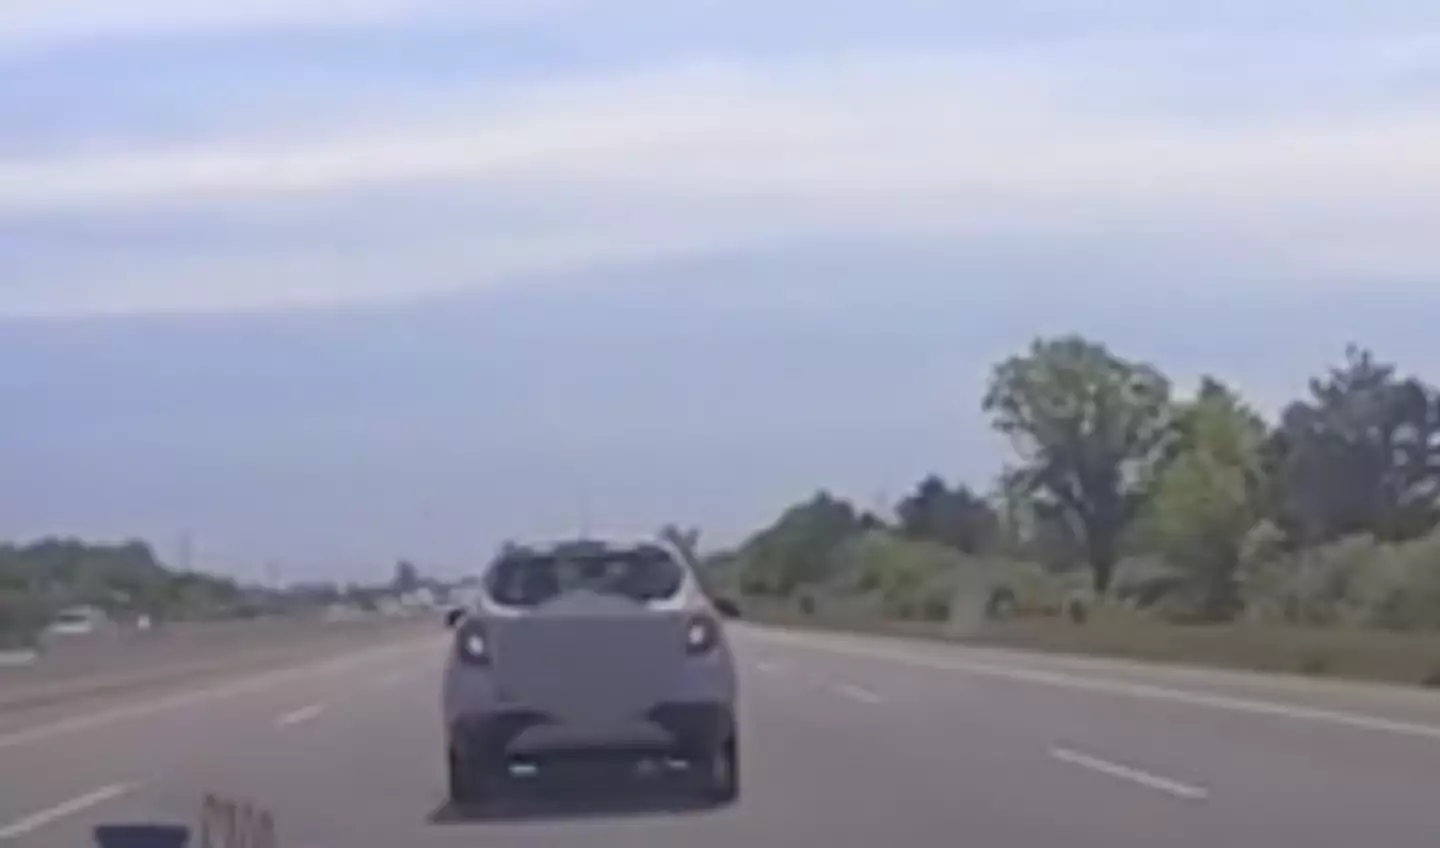 The vehicle was caught on police dash cam footage swerving across the freeway.